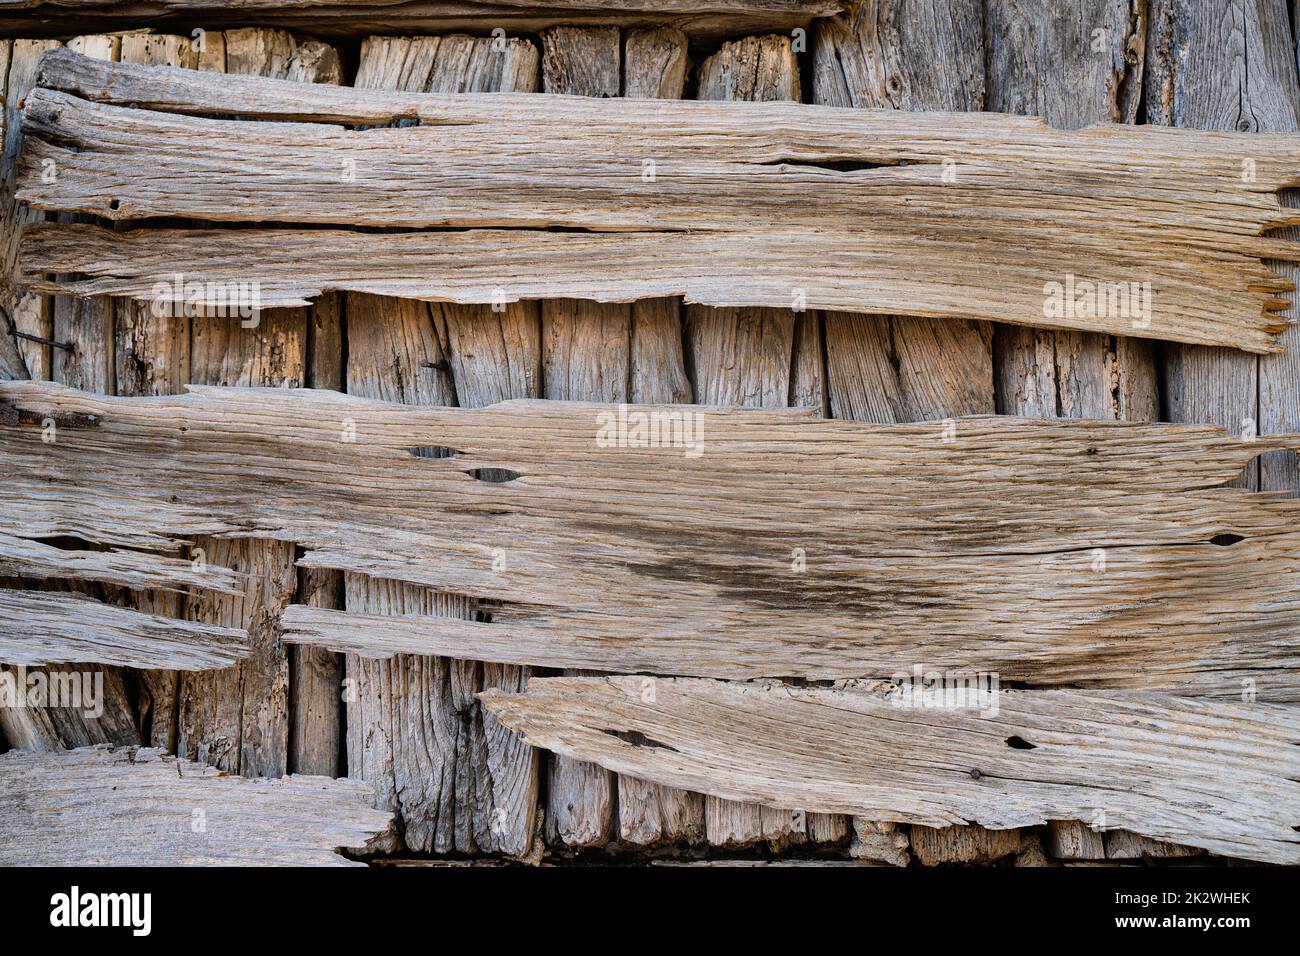 front view closeup of rustic weathered brown barn wood background with knots and nail holes damaged by weather and insects Stock Photo